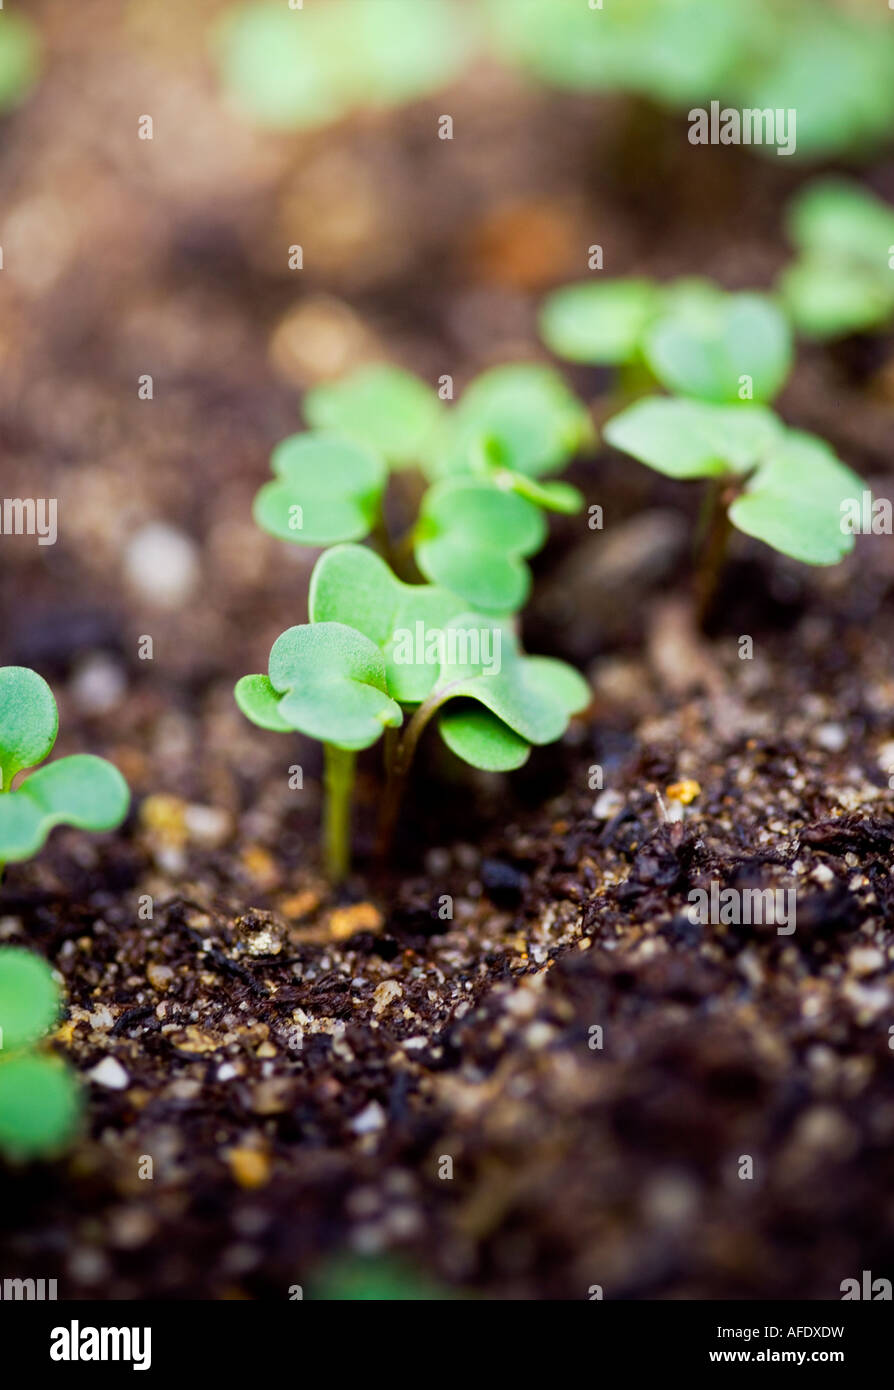 Salad seedling growing in April in organic compost Stock Photo